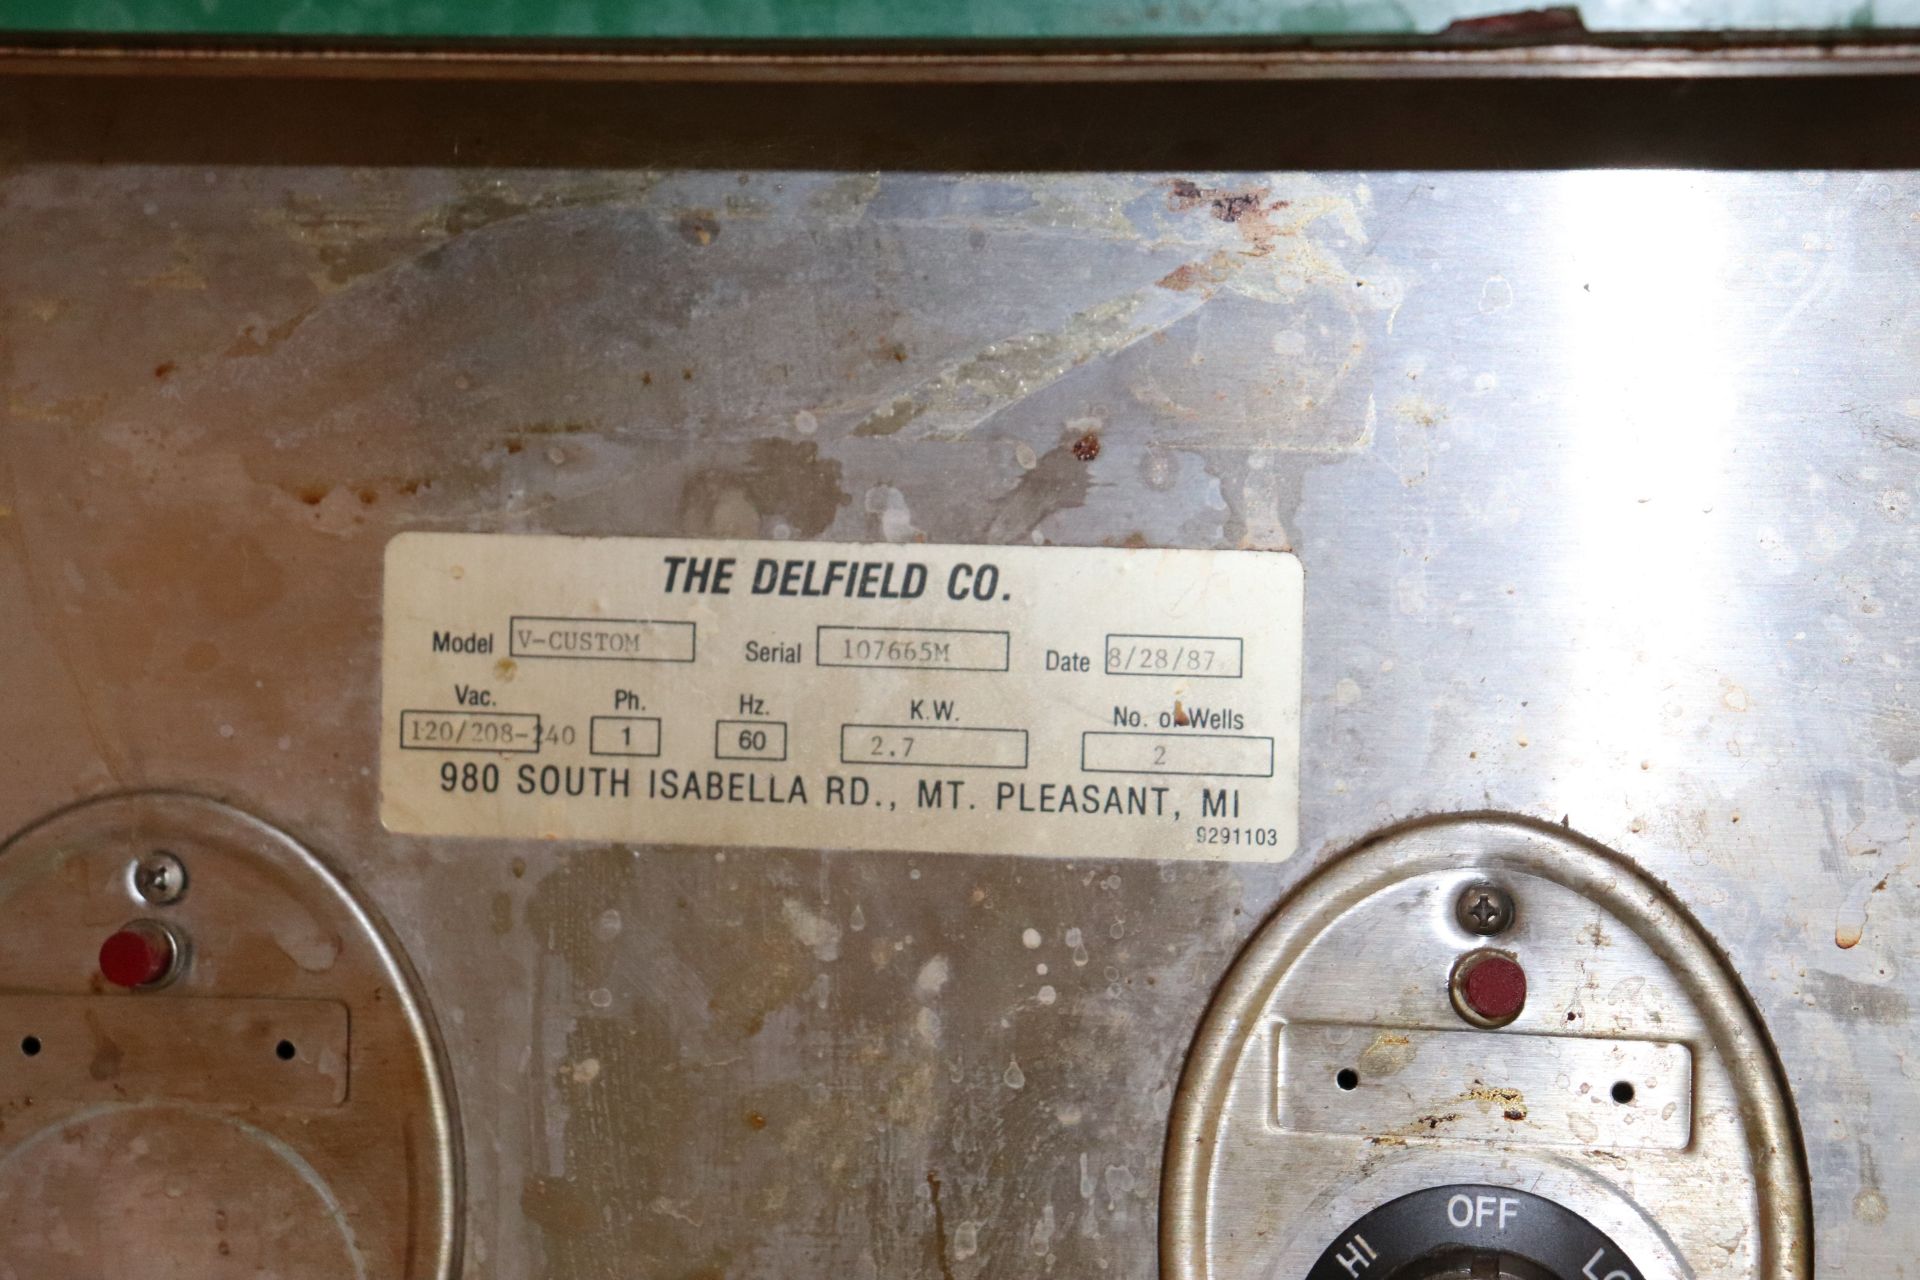 The Delfield Co. Two bay food warming station with sneeze guard Model V_custom serial 107665 M - Image 6 of 6